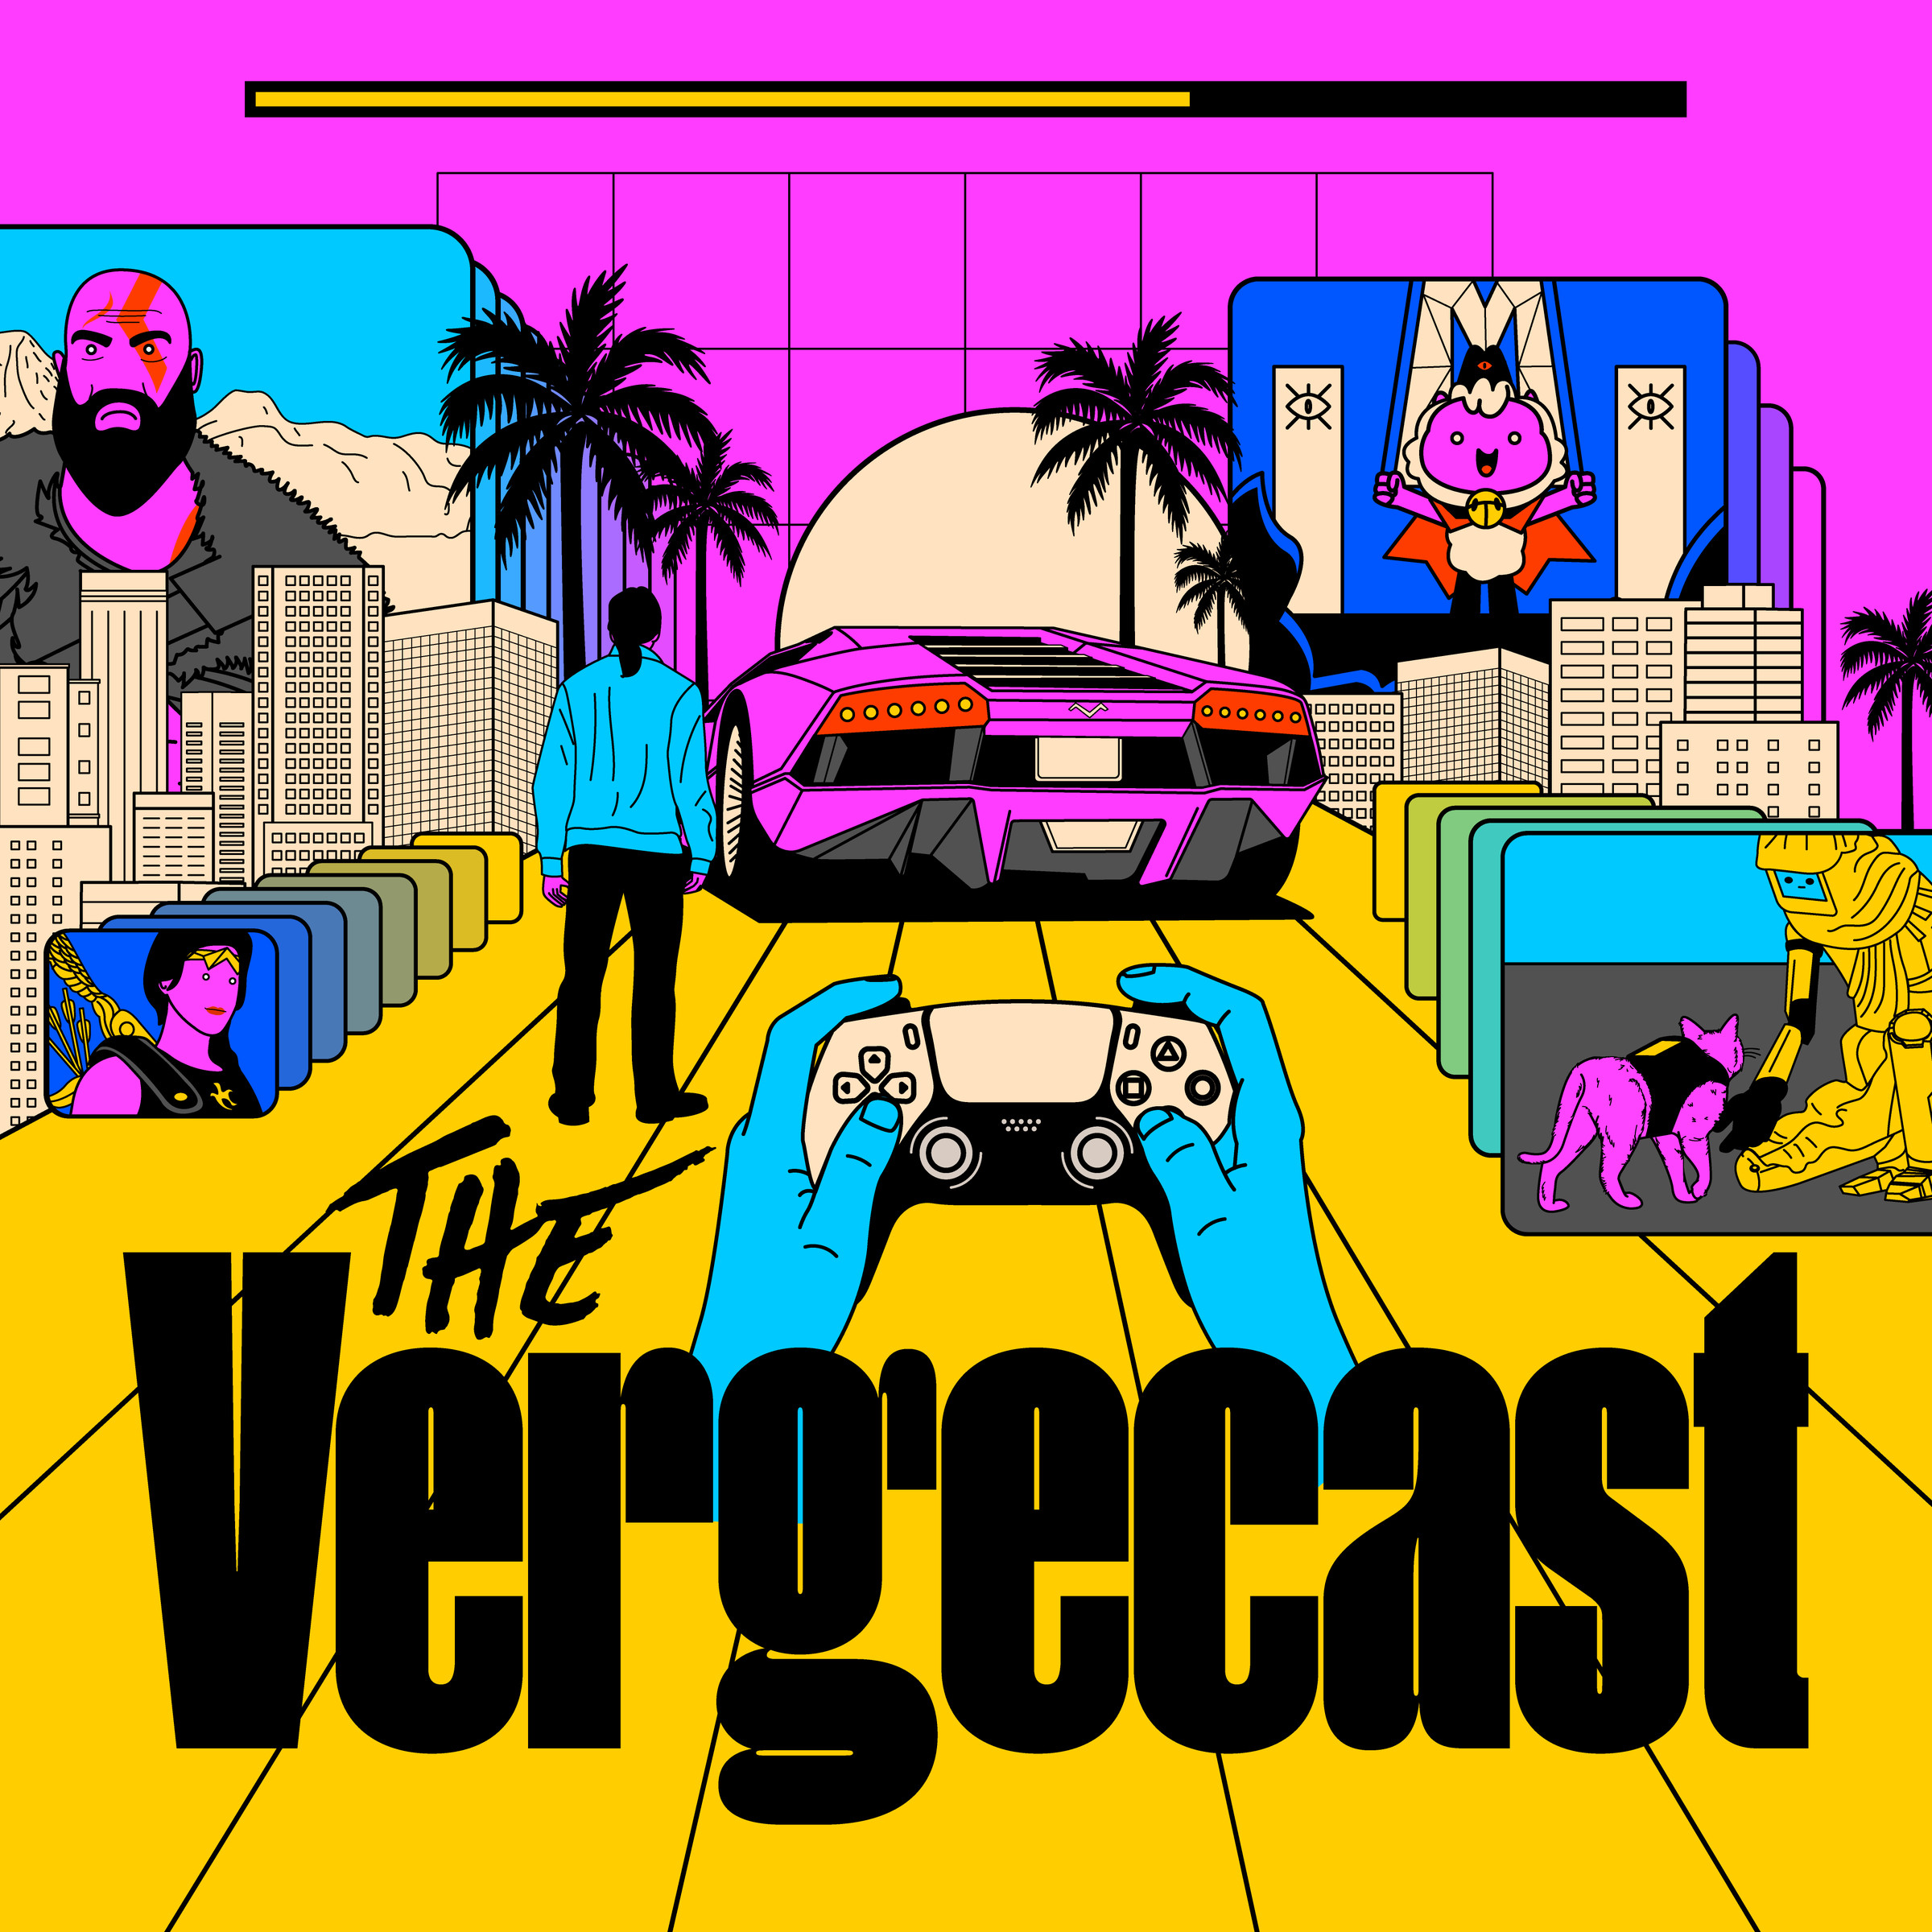 An illustrated version of the Vergecast logo, with screenshots from games.